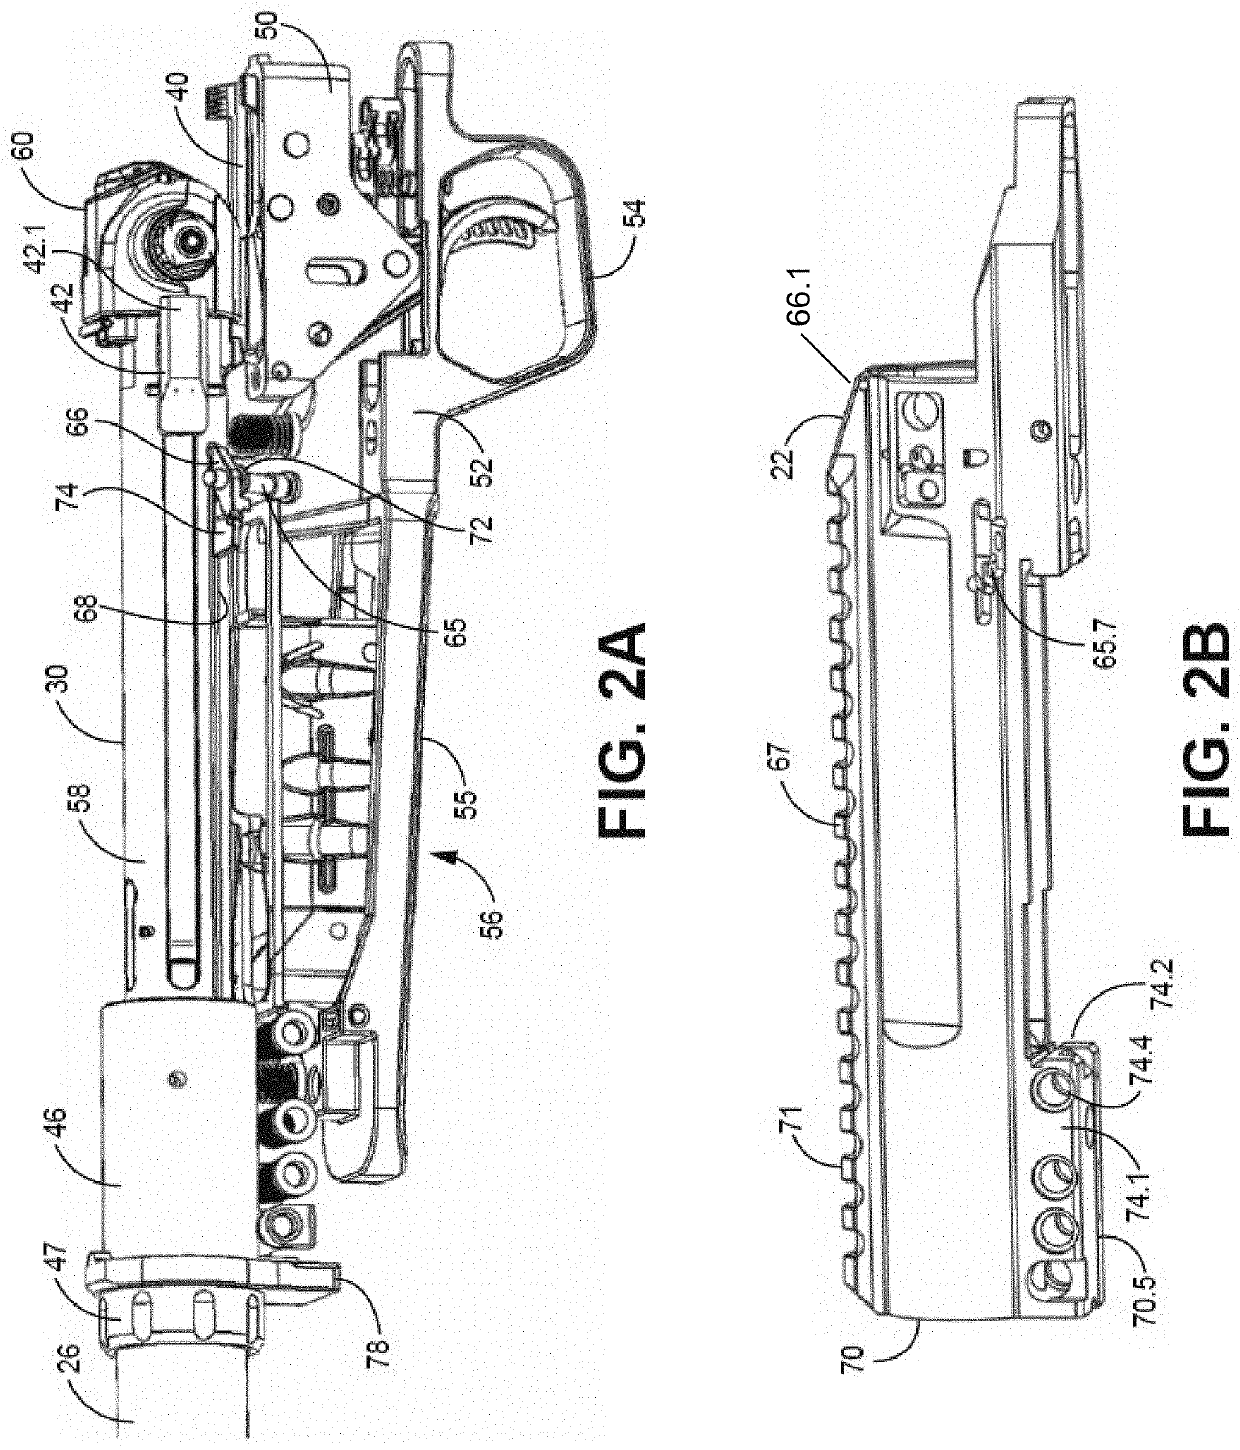 Rifle with straight pull bolt action